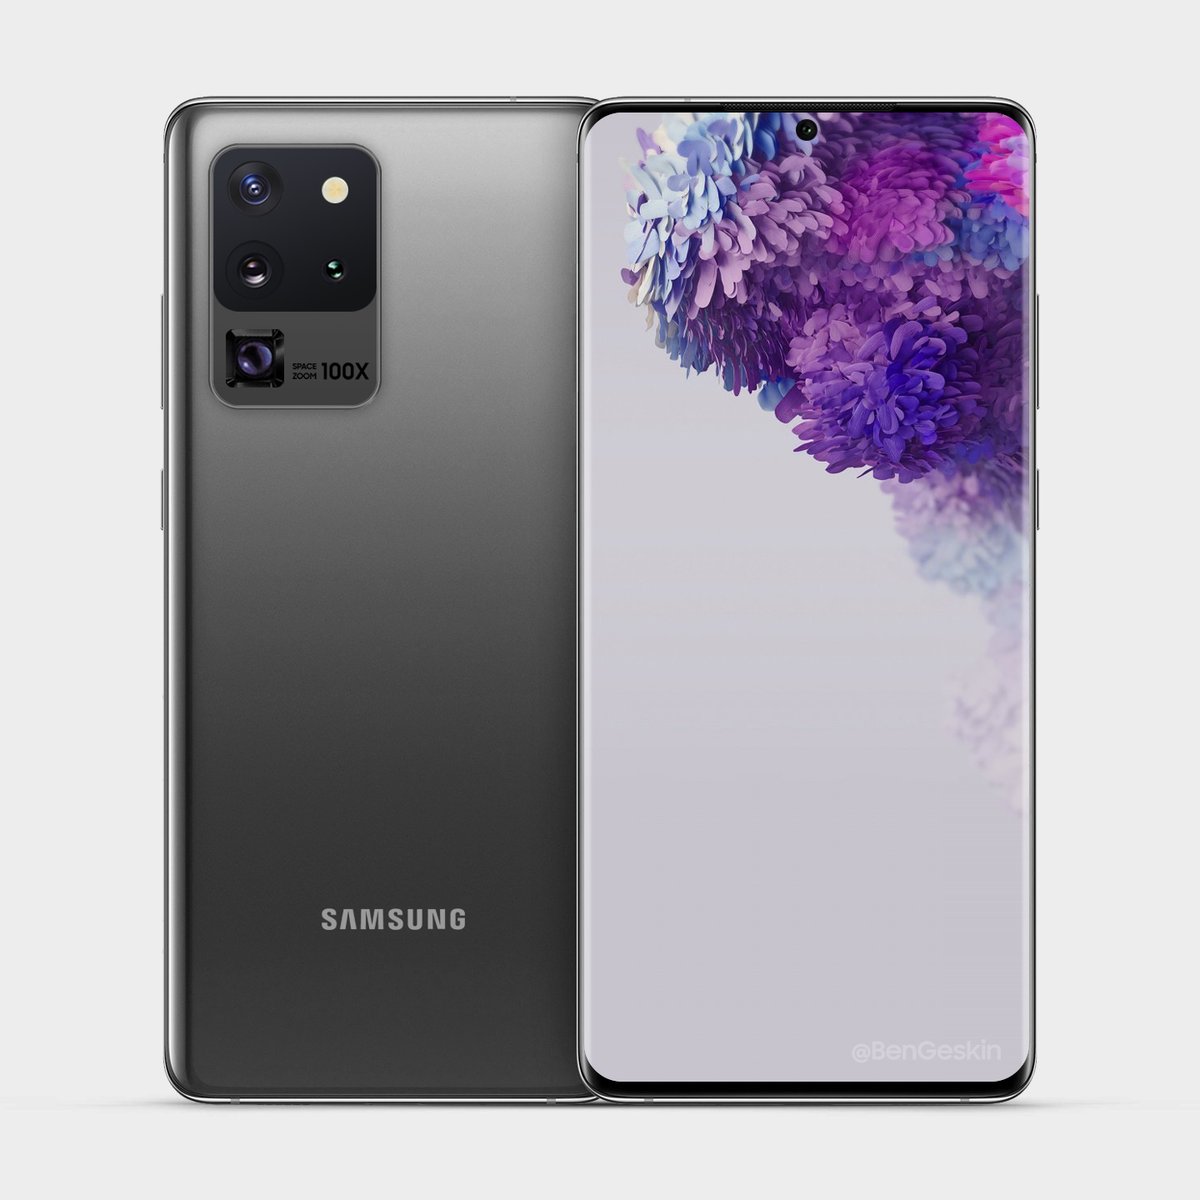 Ben Geskin on Twitter: "Here's the most Samsung Galaxy S20 Ultra render What you think? https://t.co/jpifyscQ96" / Twitter